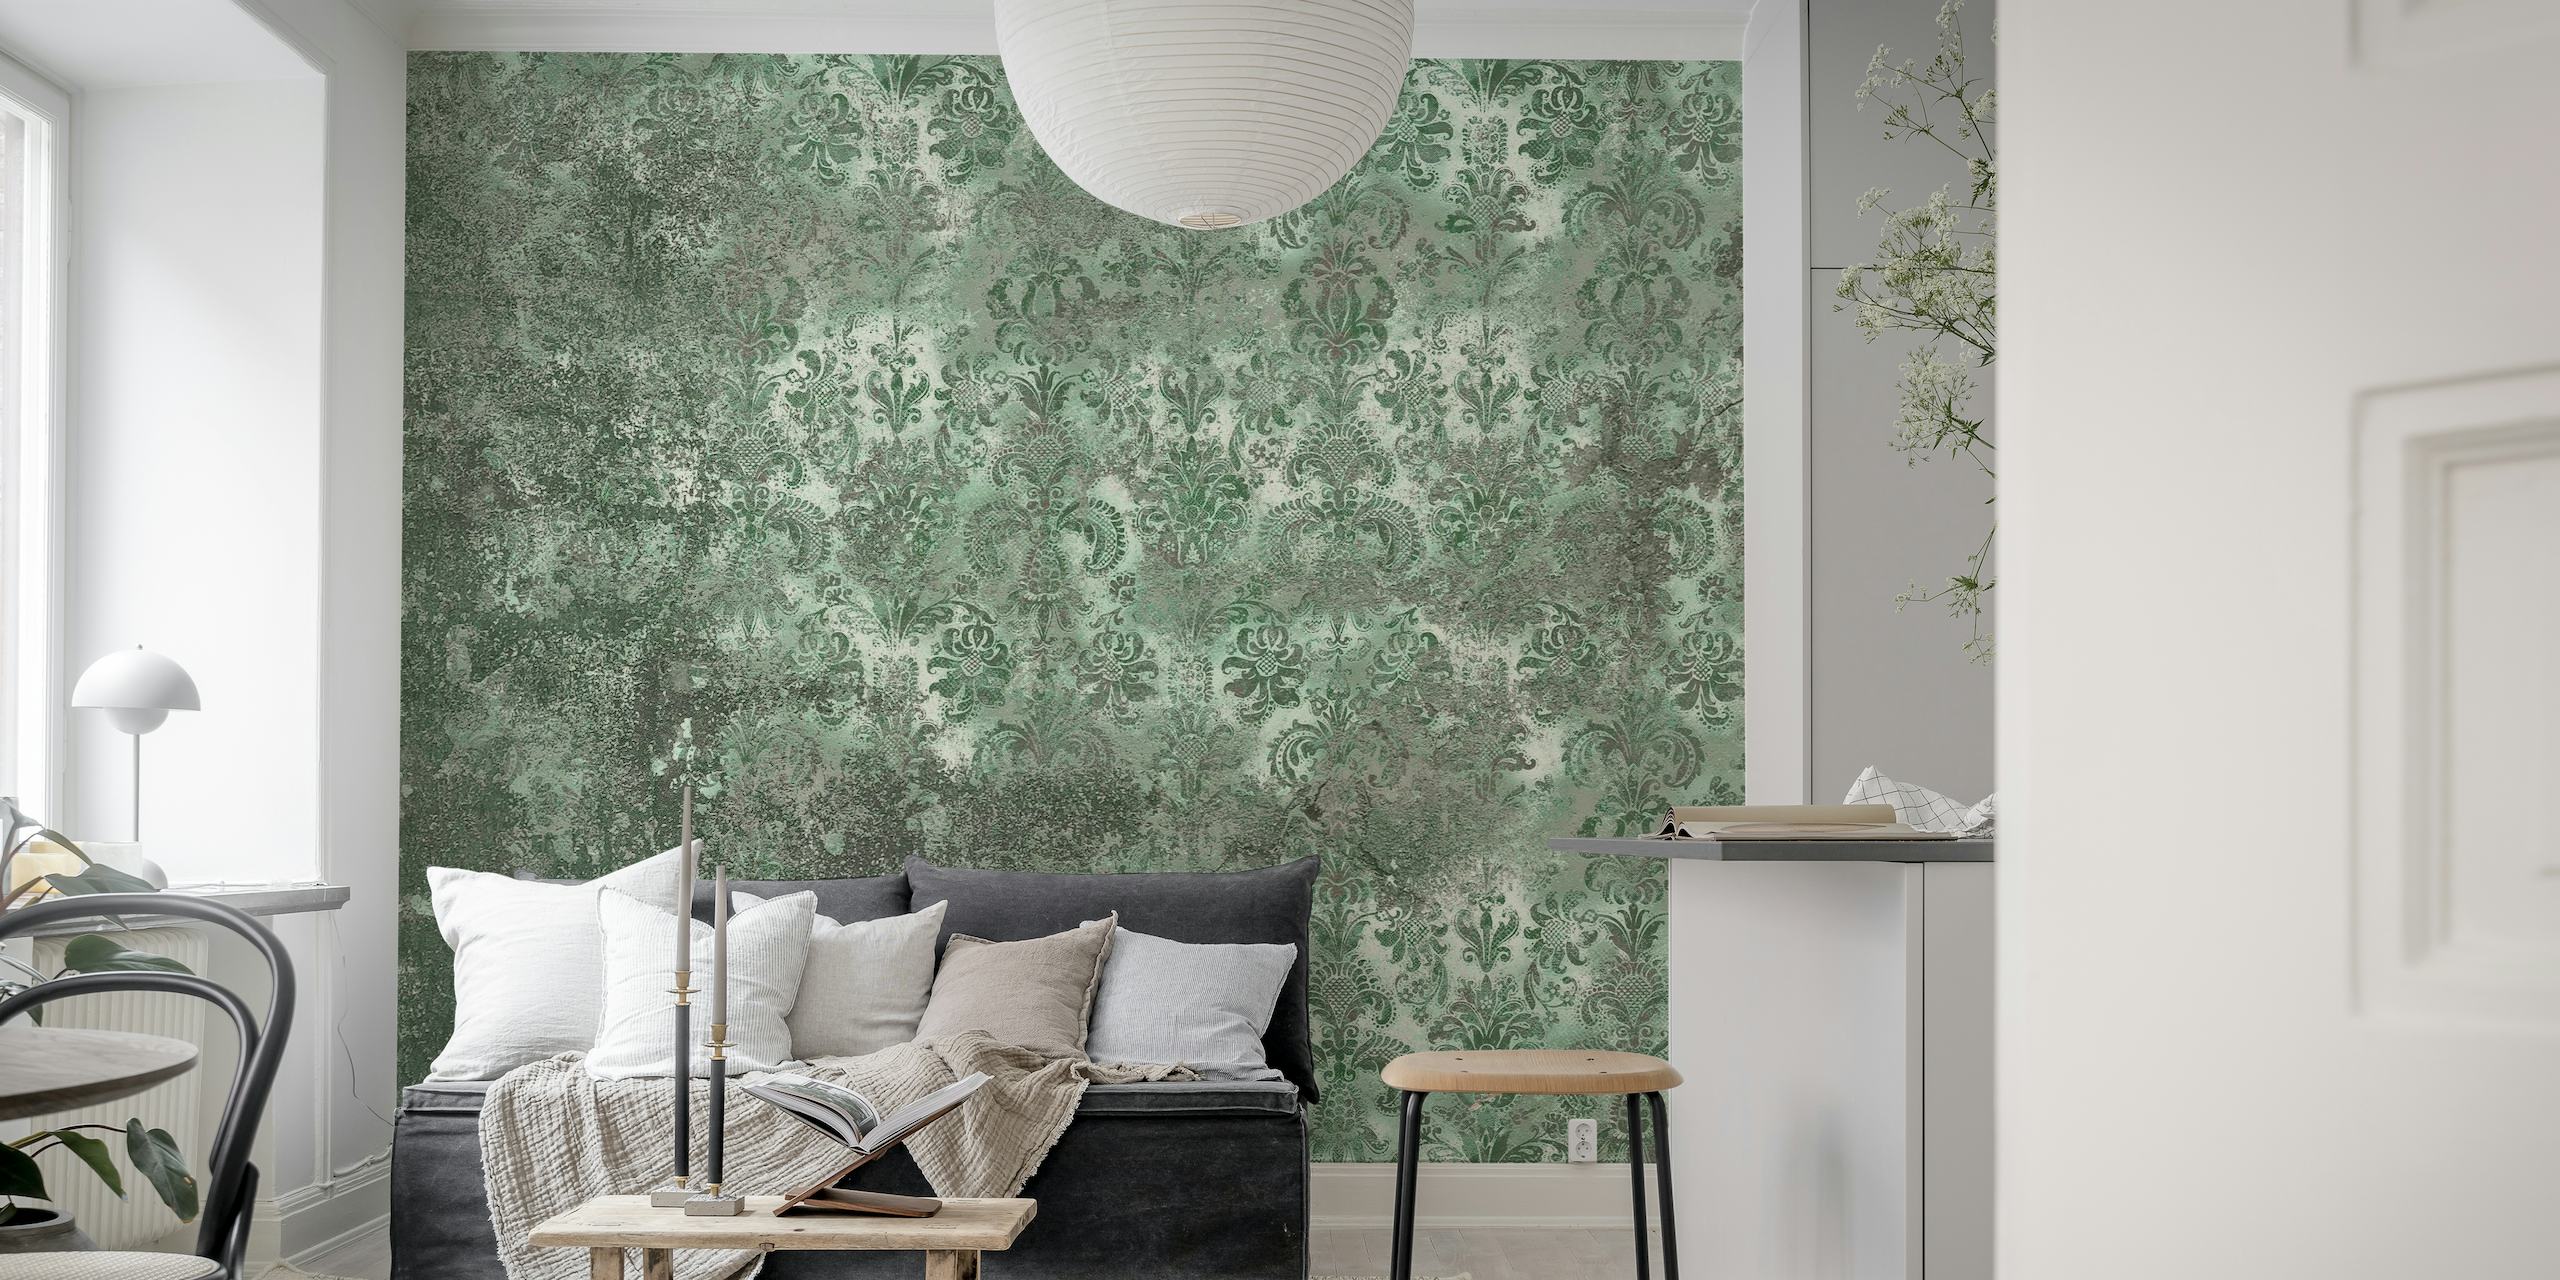 Grunge Damask Wall Hunter mural featuring distressed texture with floral motifs